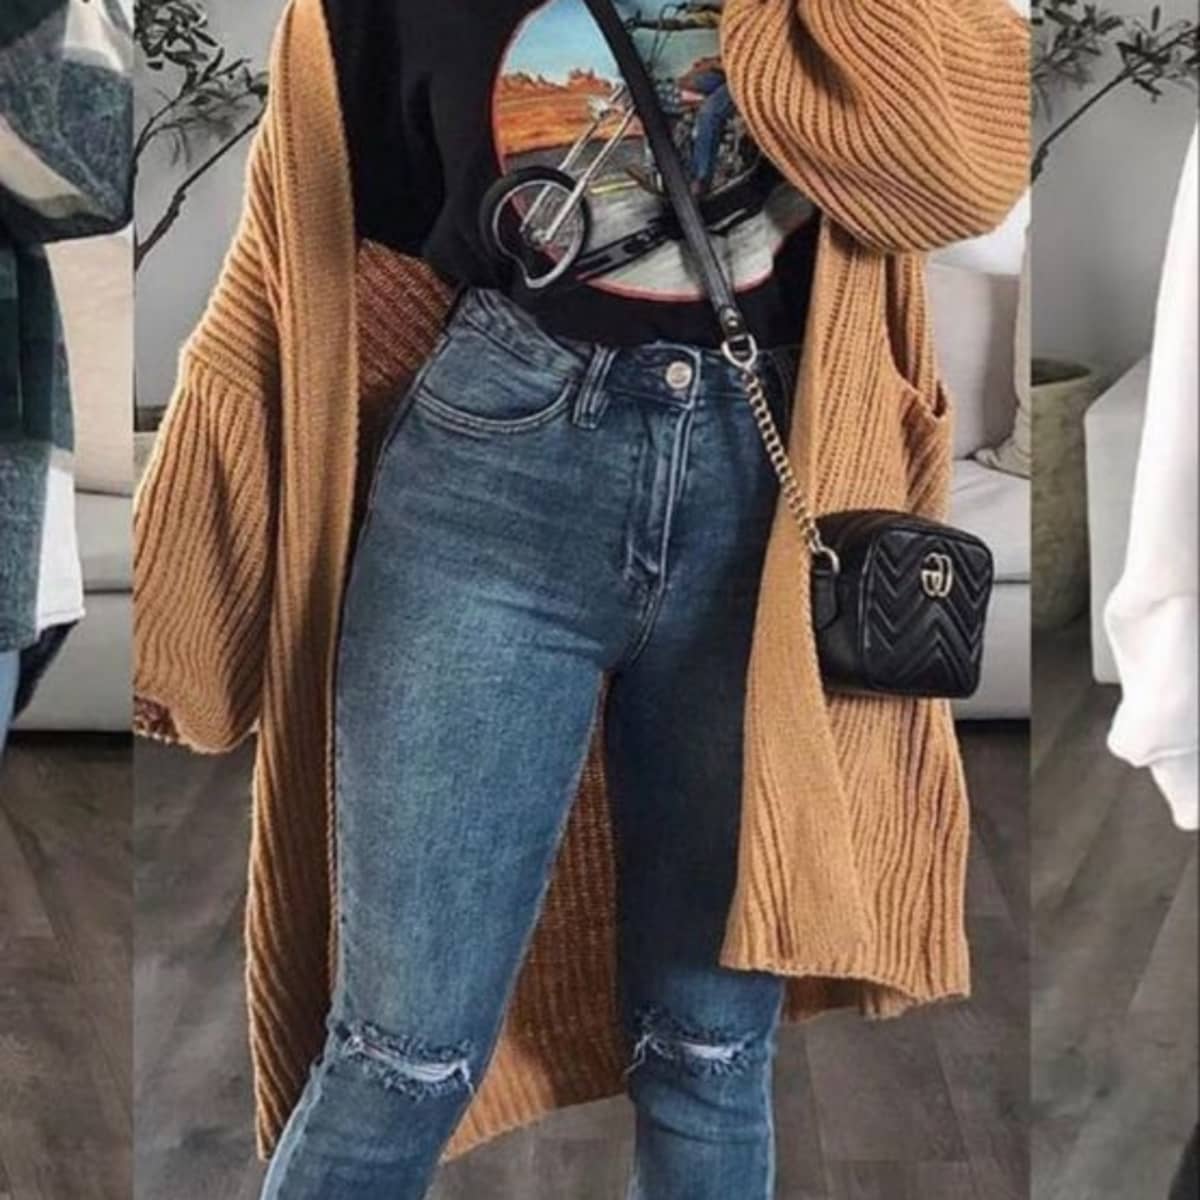 Amazing Outfits  Fashion outfits, Cute outfits, Fall outfits